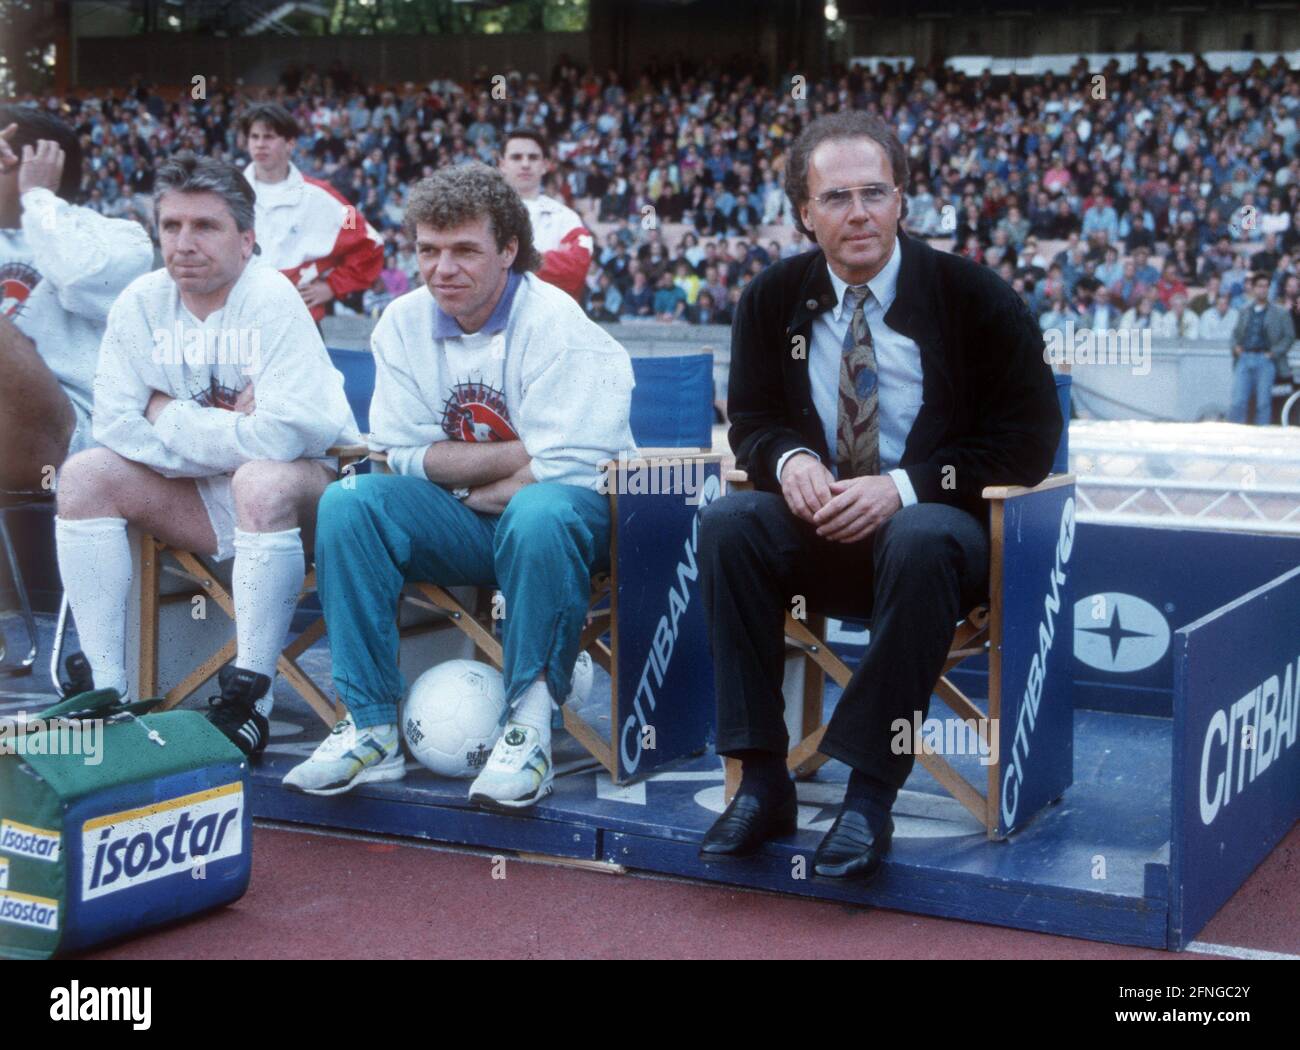 Farewell match for Pierre Littbarski on 04.05.1993 in Cologne. Coach's bench with Franz Beckenbauer (right). Next to him: Physiotherapist Jürgen Schäfer (centre) and Klaus Fischer. [automated translation] Stock Photo